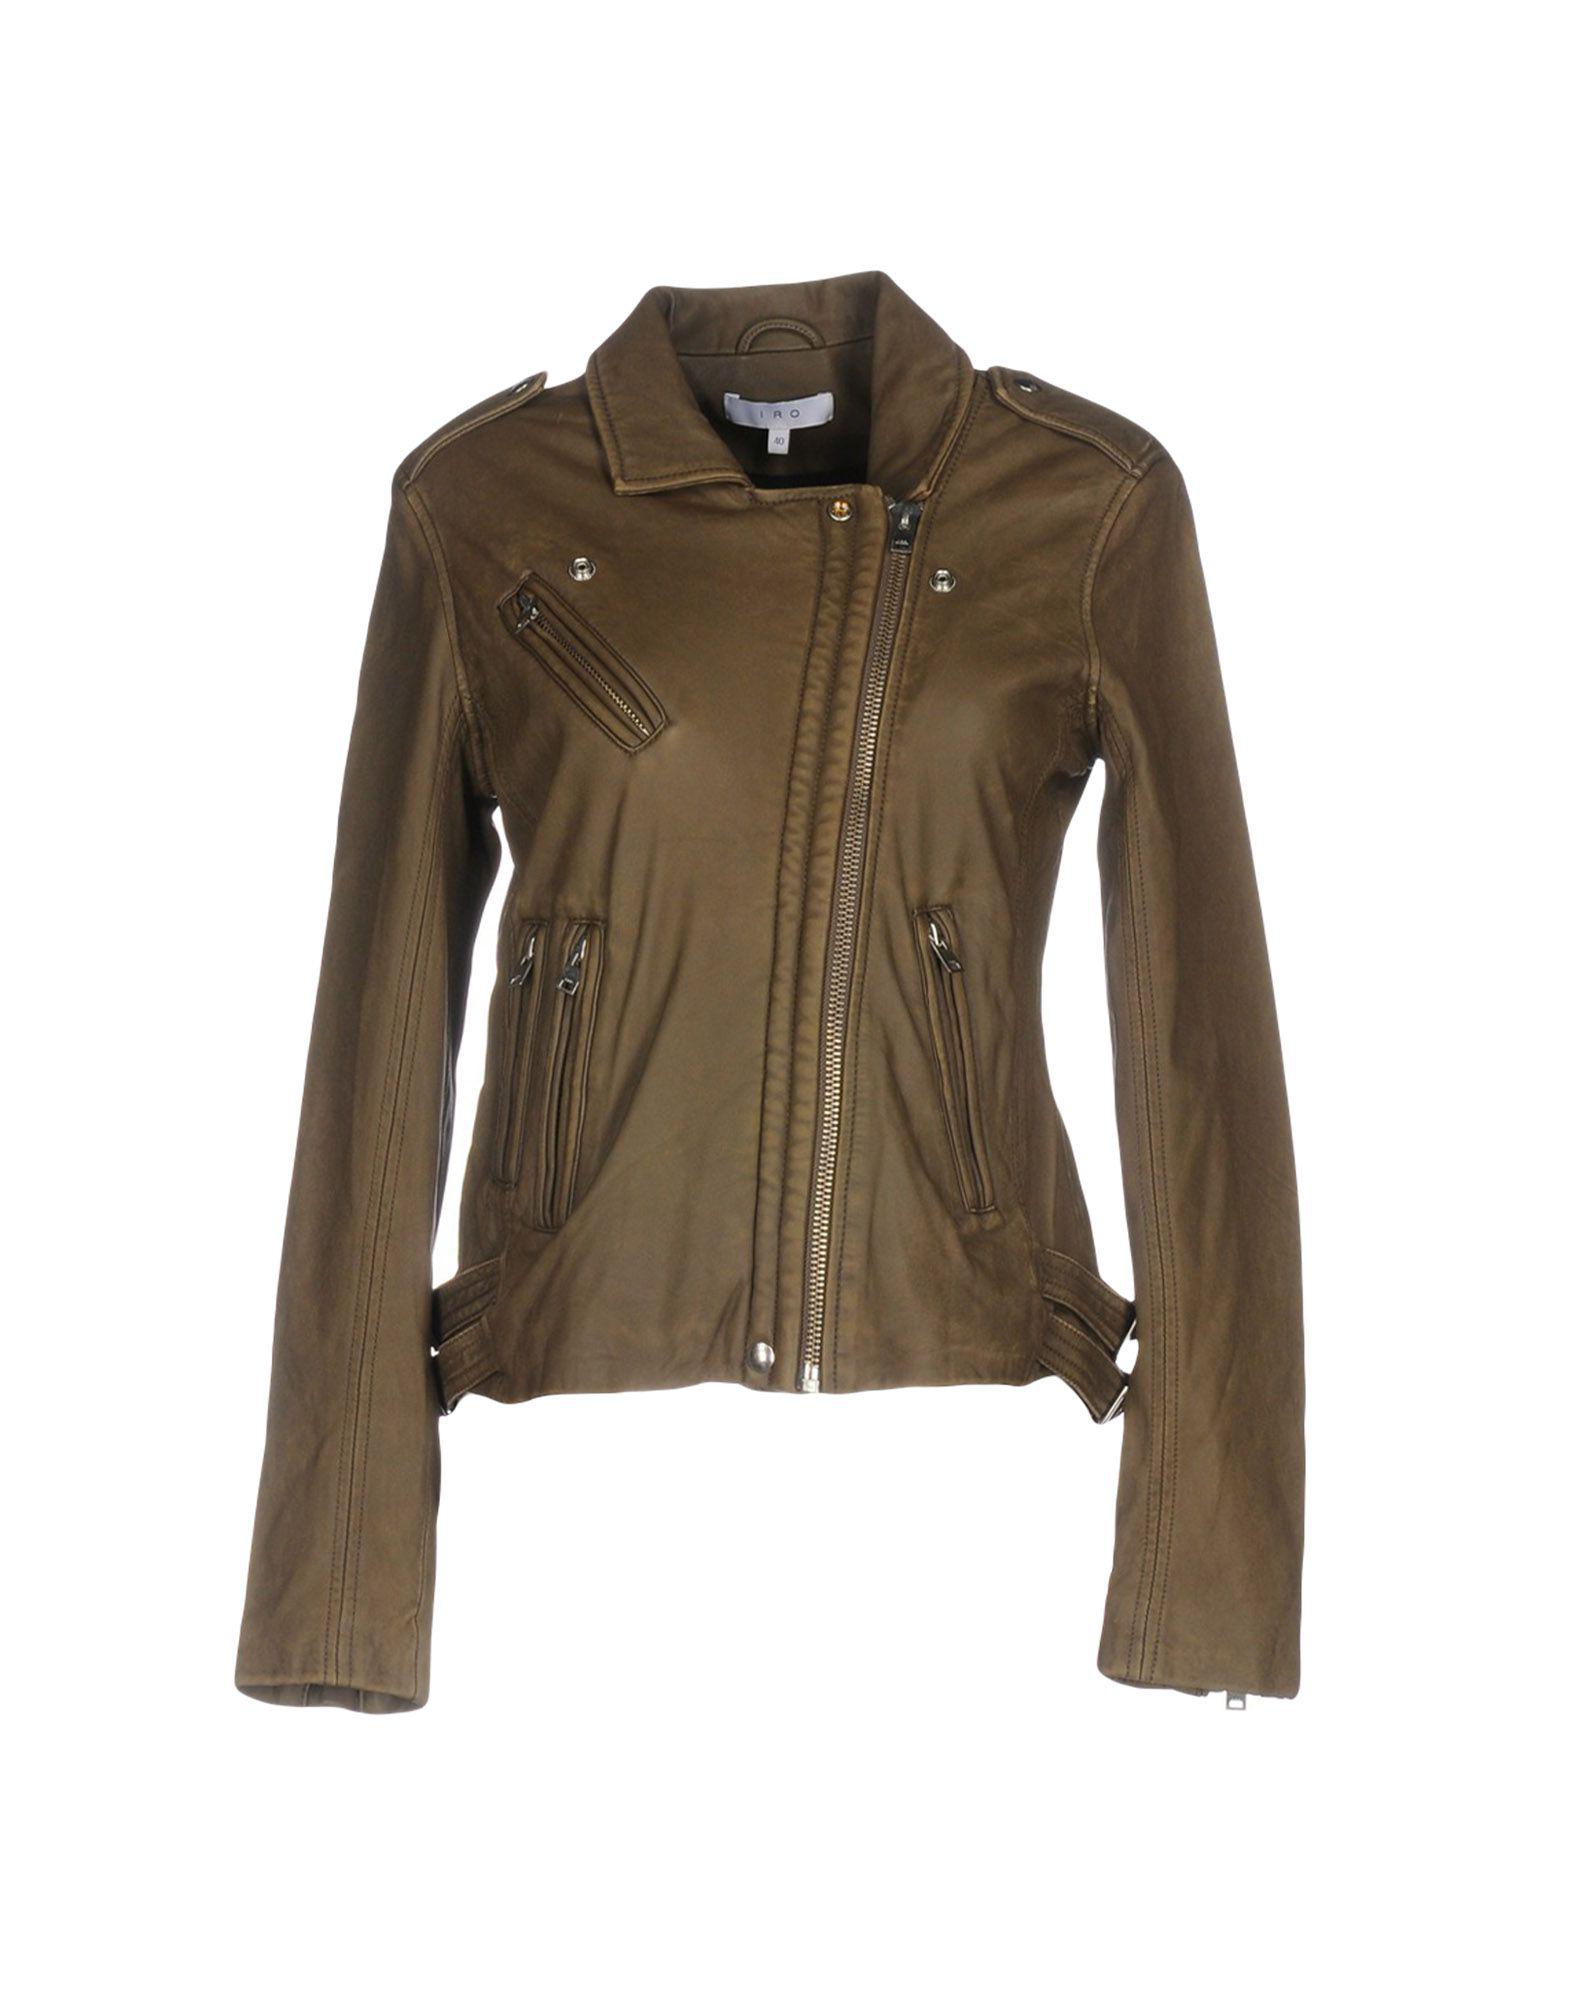 Lyst - Iro Leather Jacket in Green